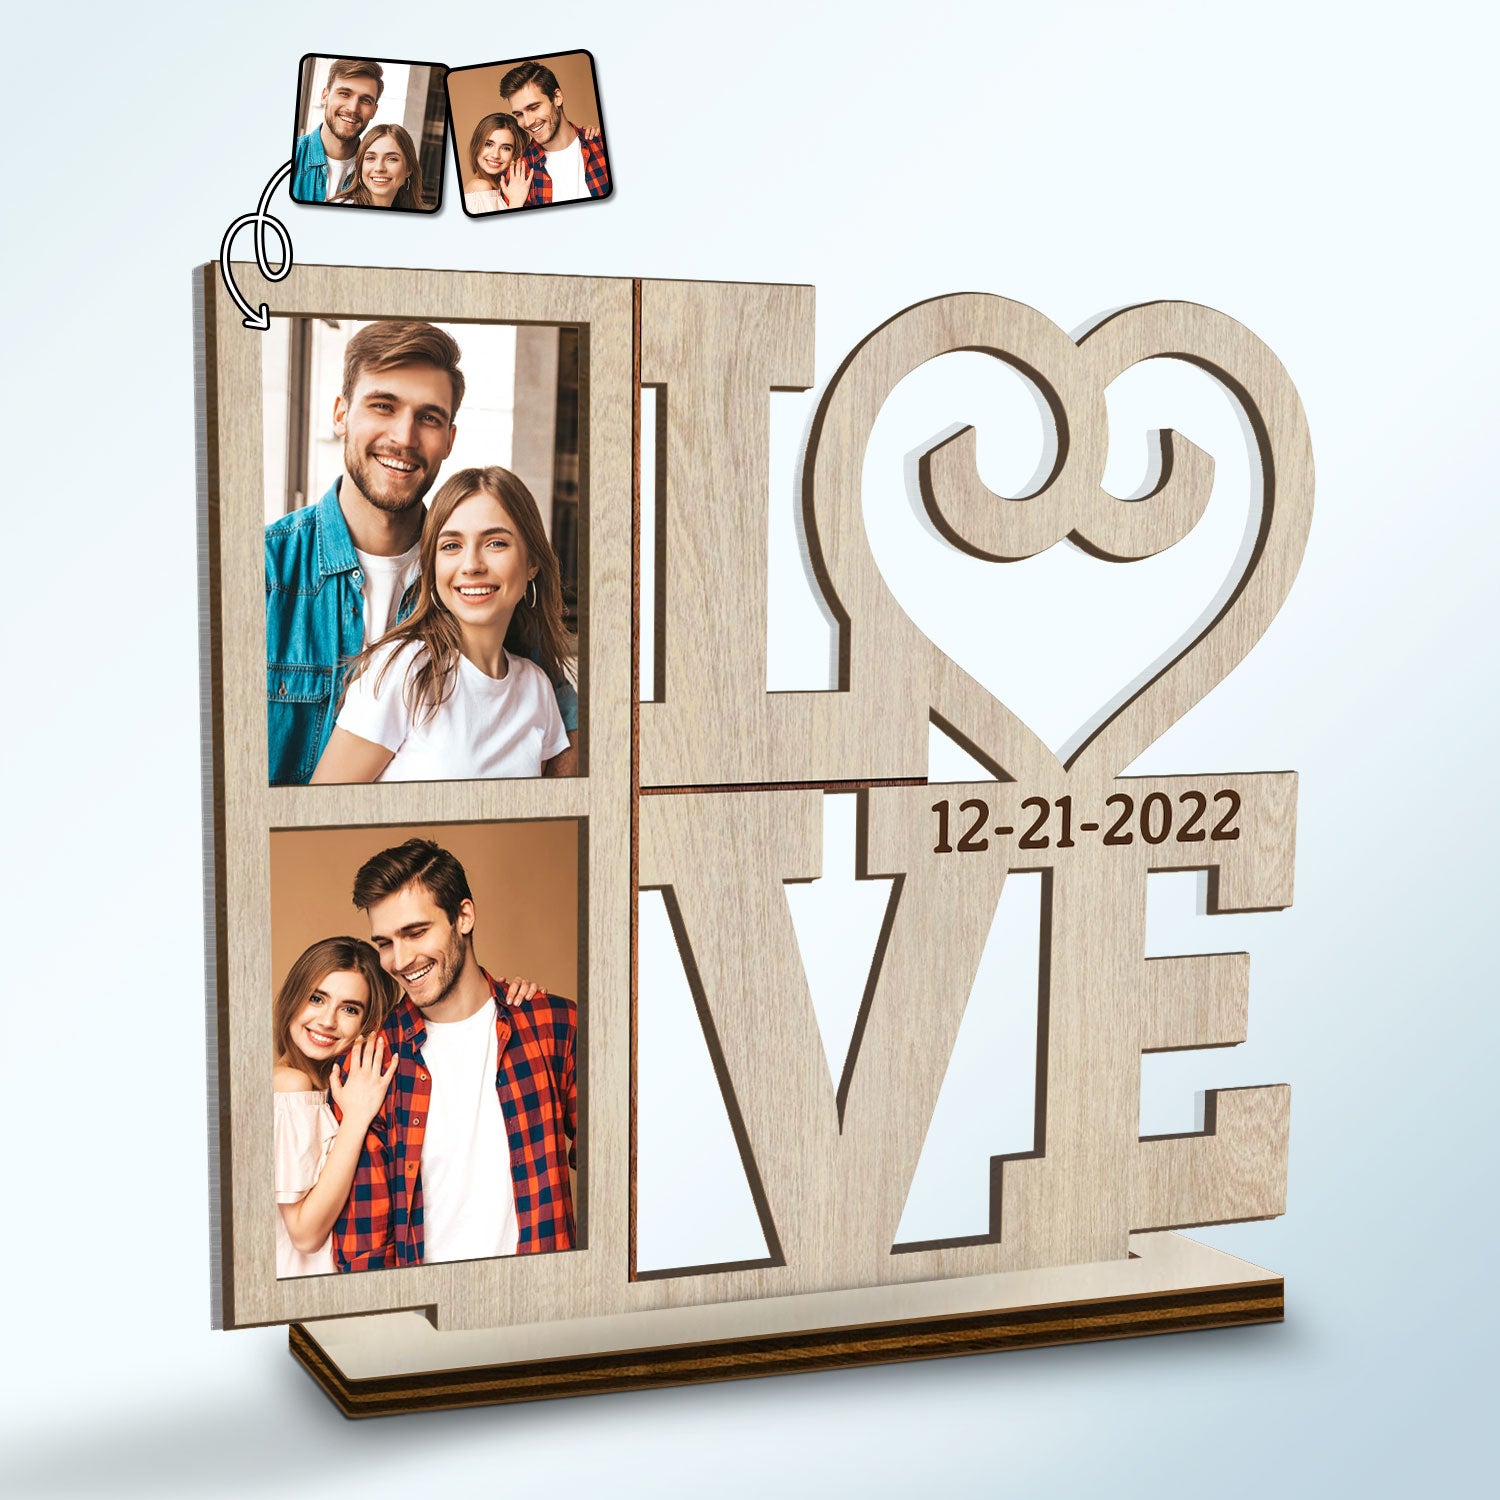 Custom Photo LOVE - Ring Holder, Propose, Anniversary Gift For Spouse, Husband, Wife, Couple - Personalized Custom Shaped 2-Layered Acrylic Wooden Plaque